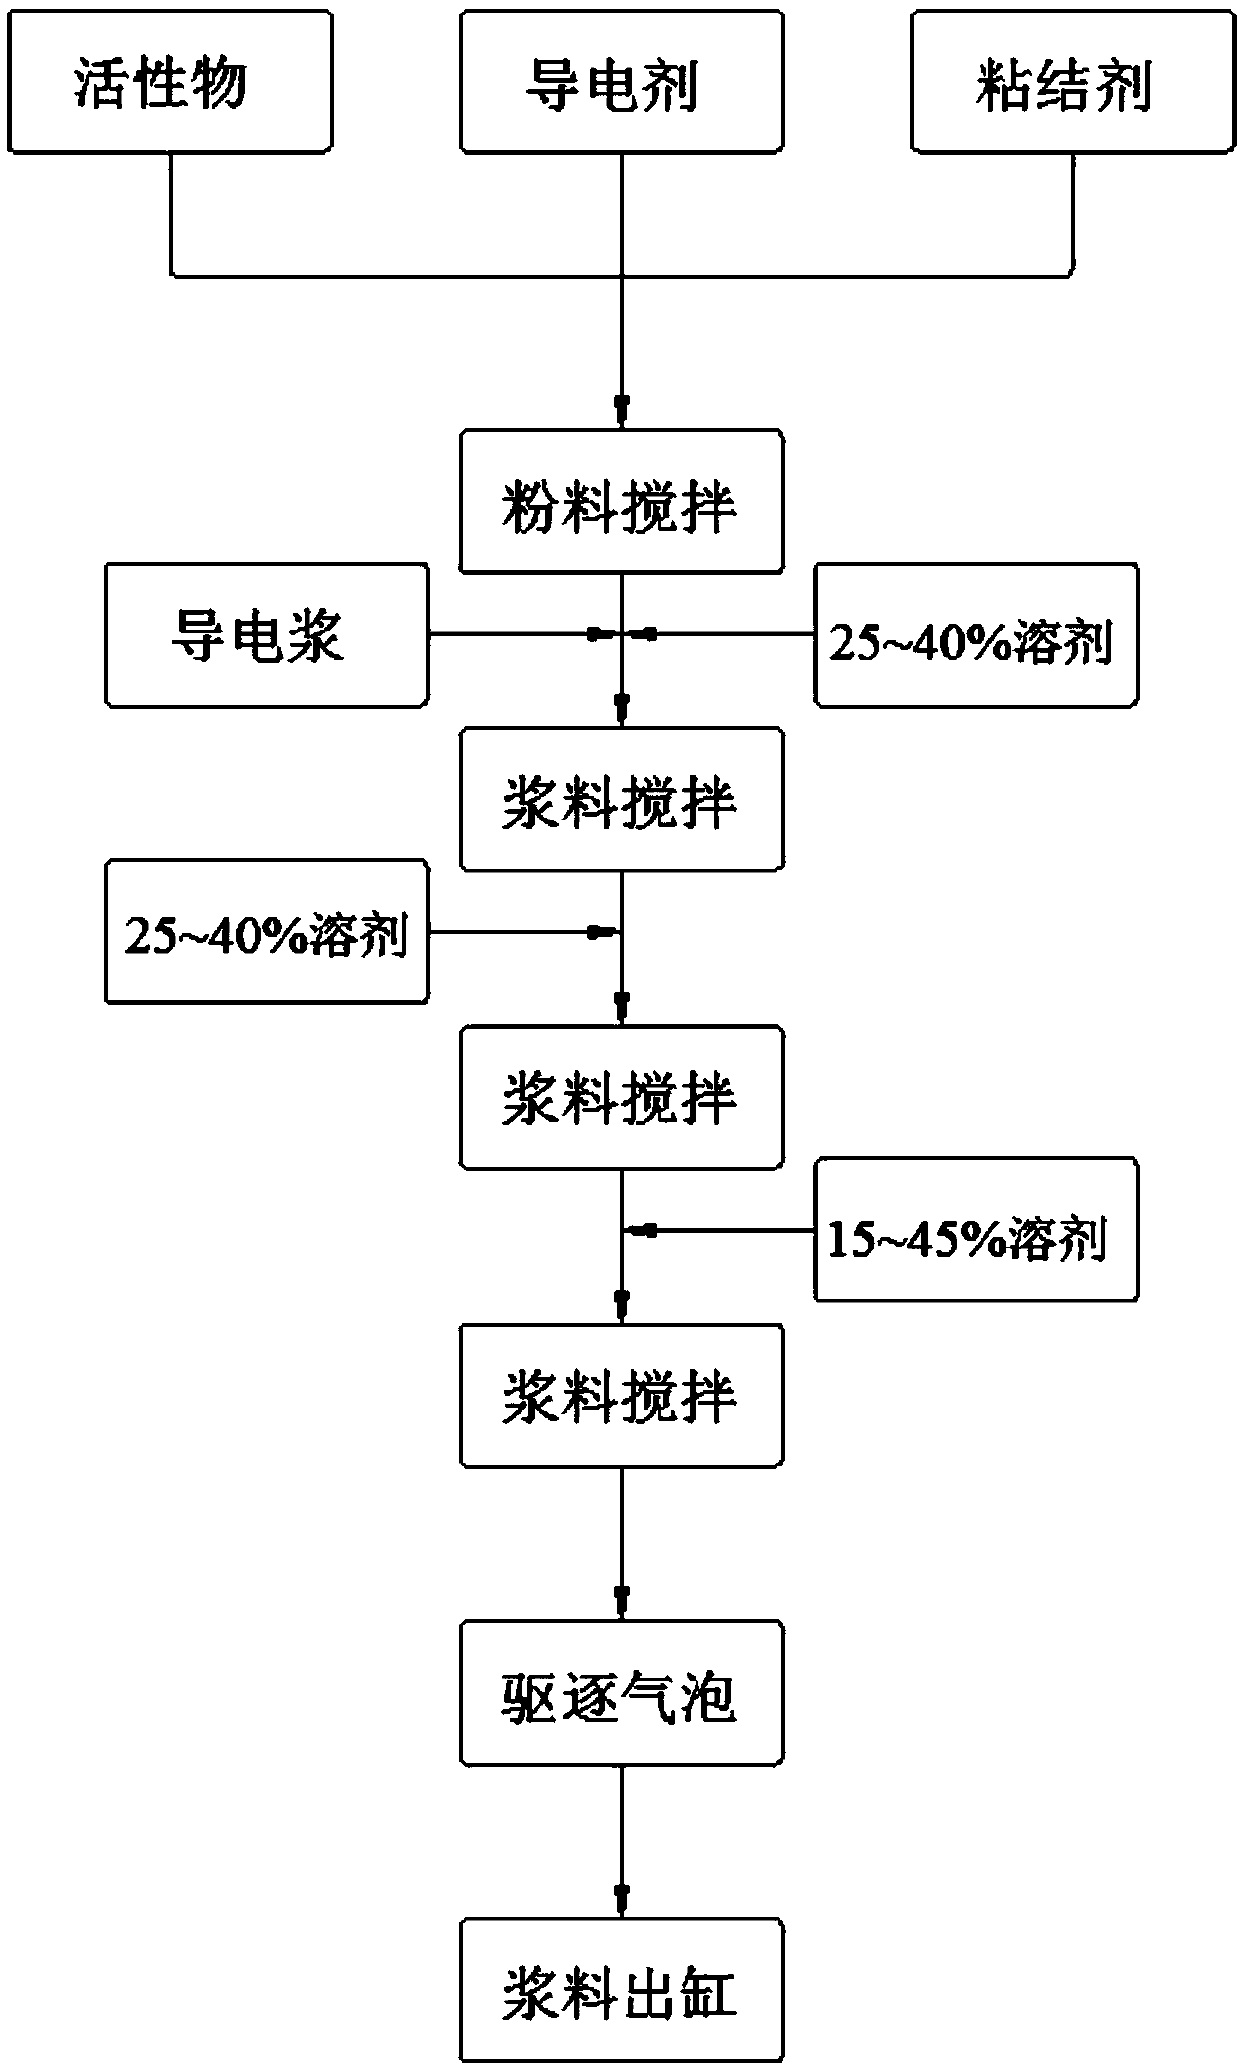 Preparation process of lithium ion oil slurry without glue and oily electrode slurry